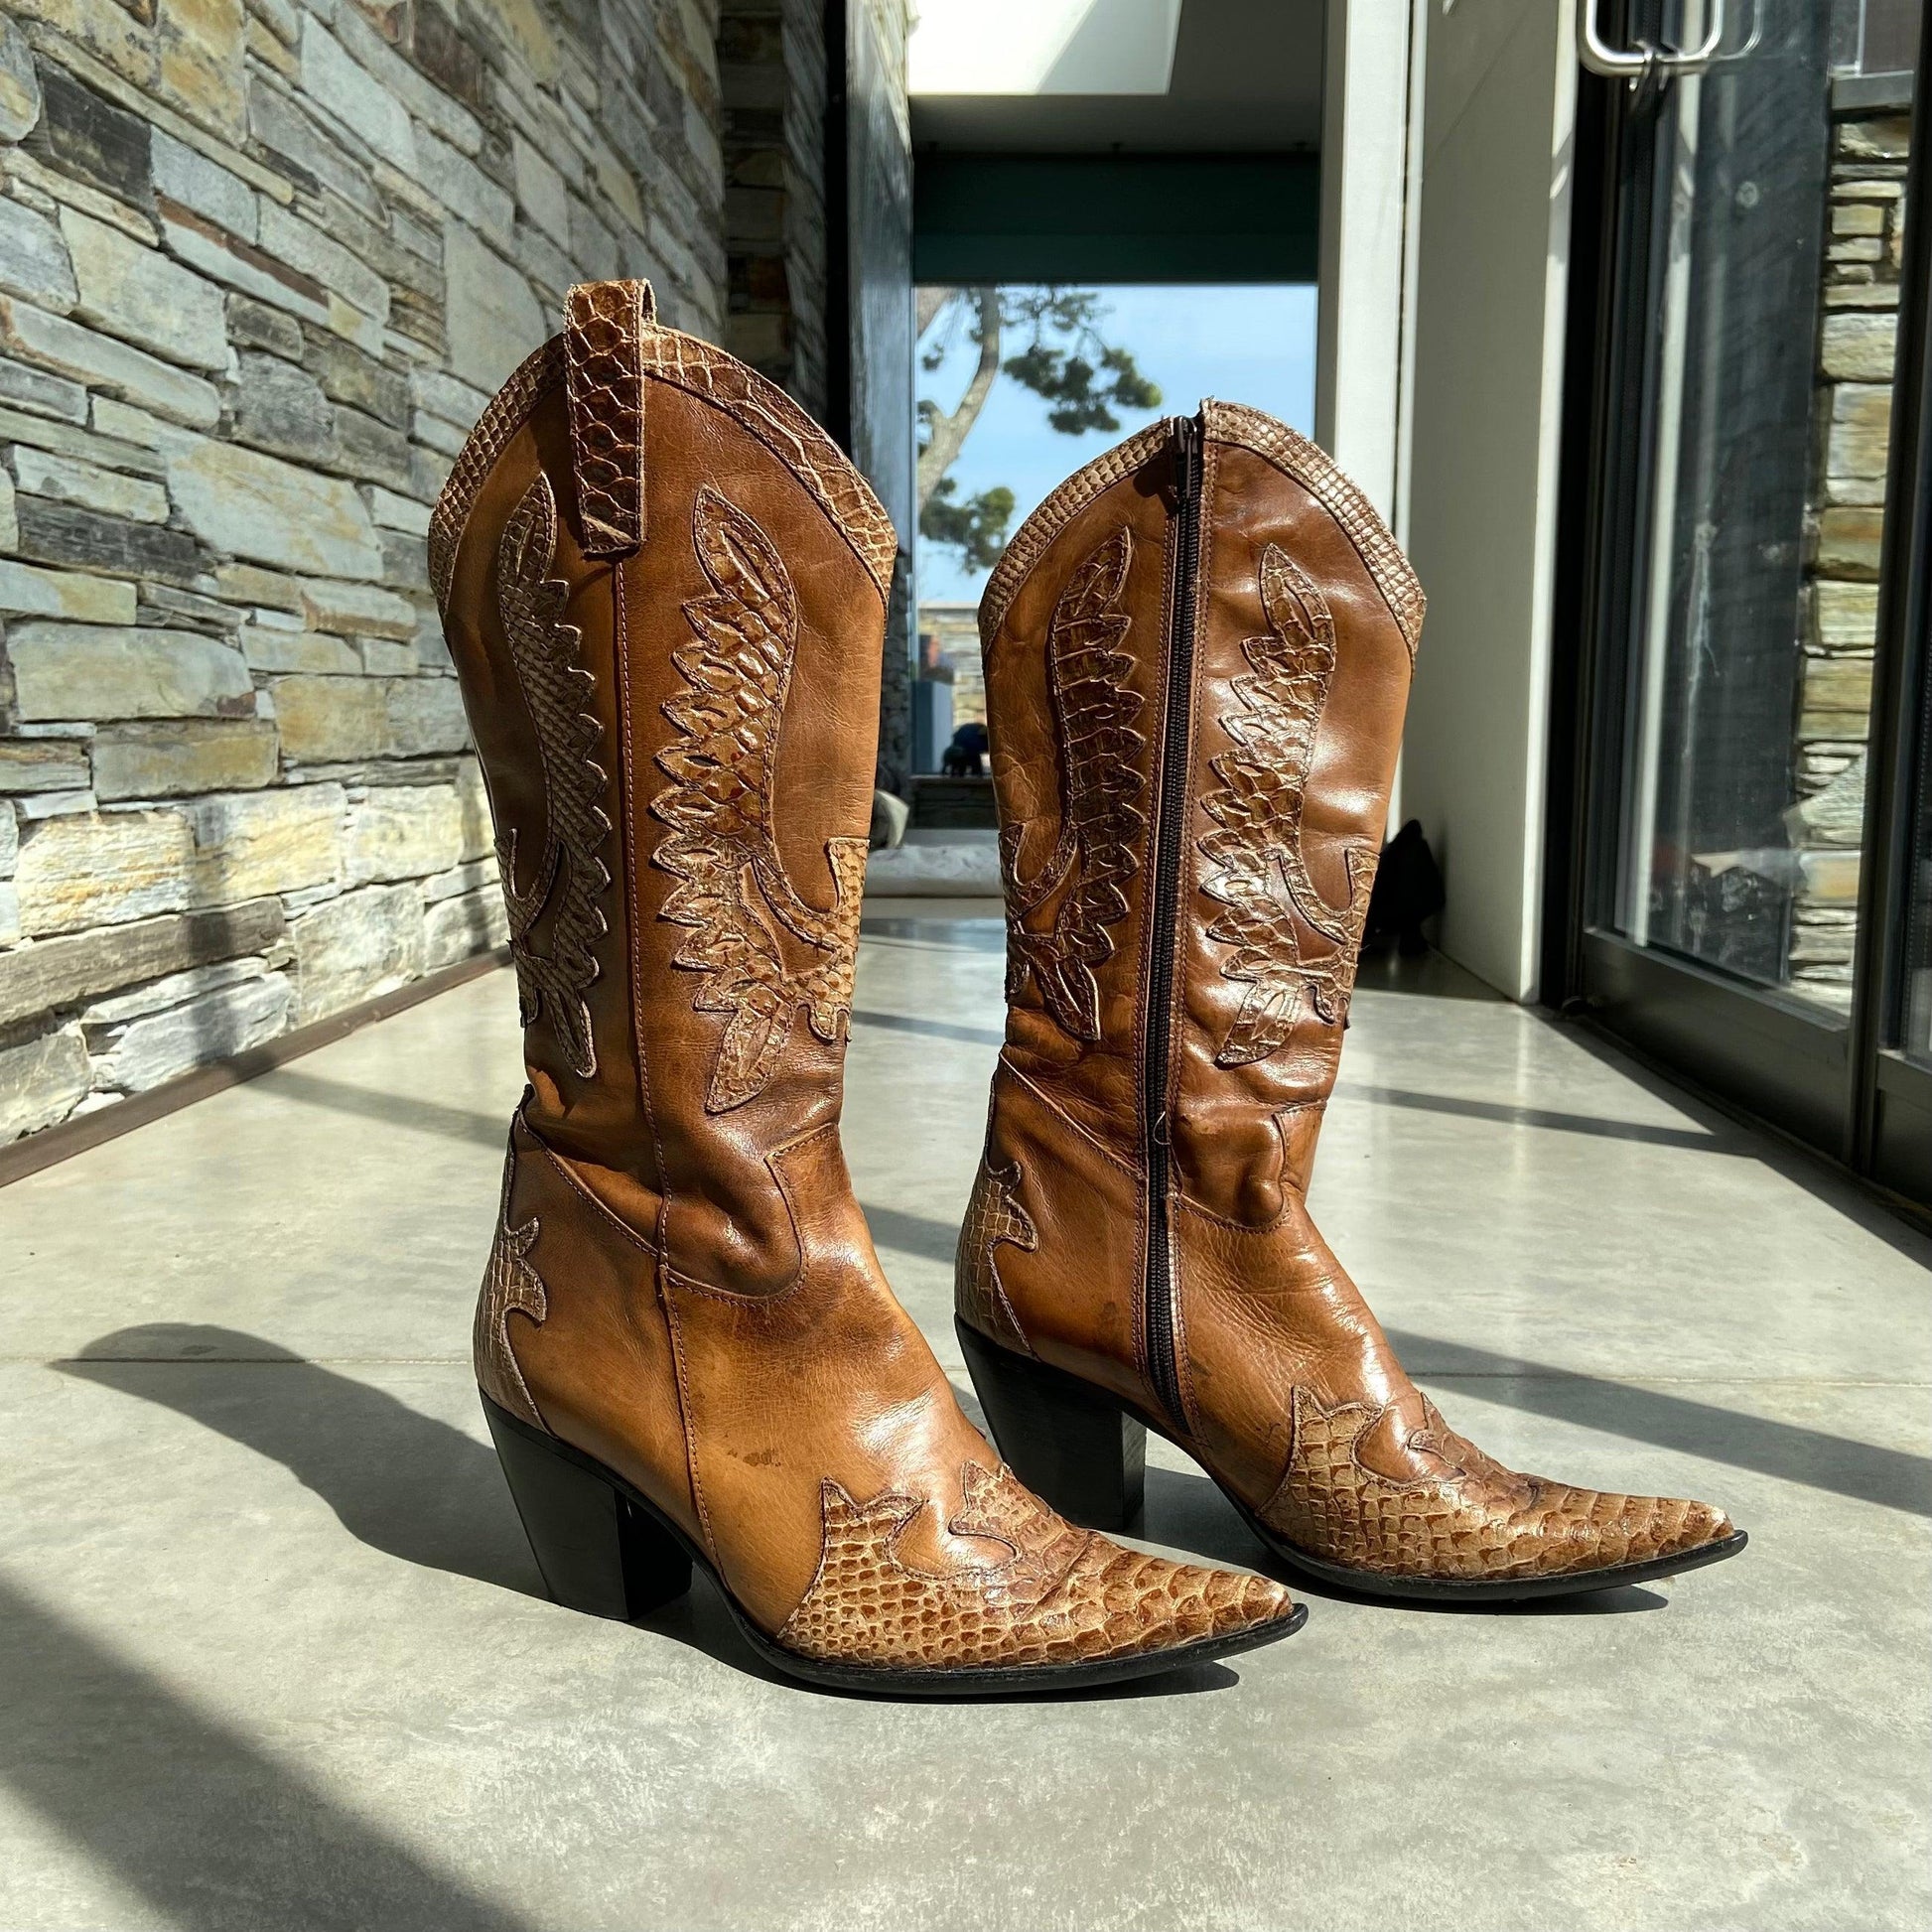 BROWN LEATHER COWBOY BOOTS - UK 5.5 - Known Source